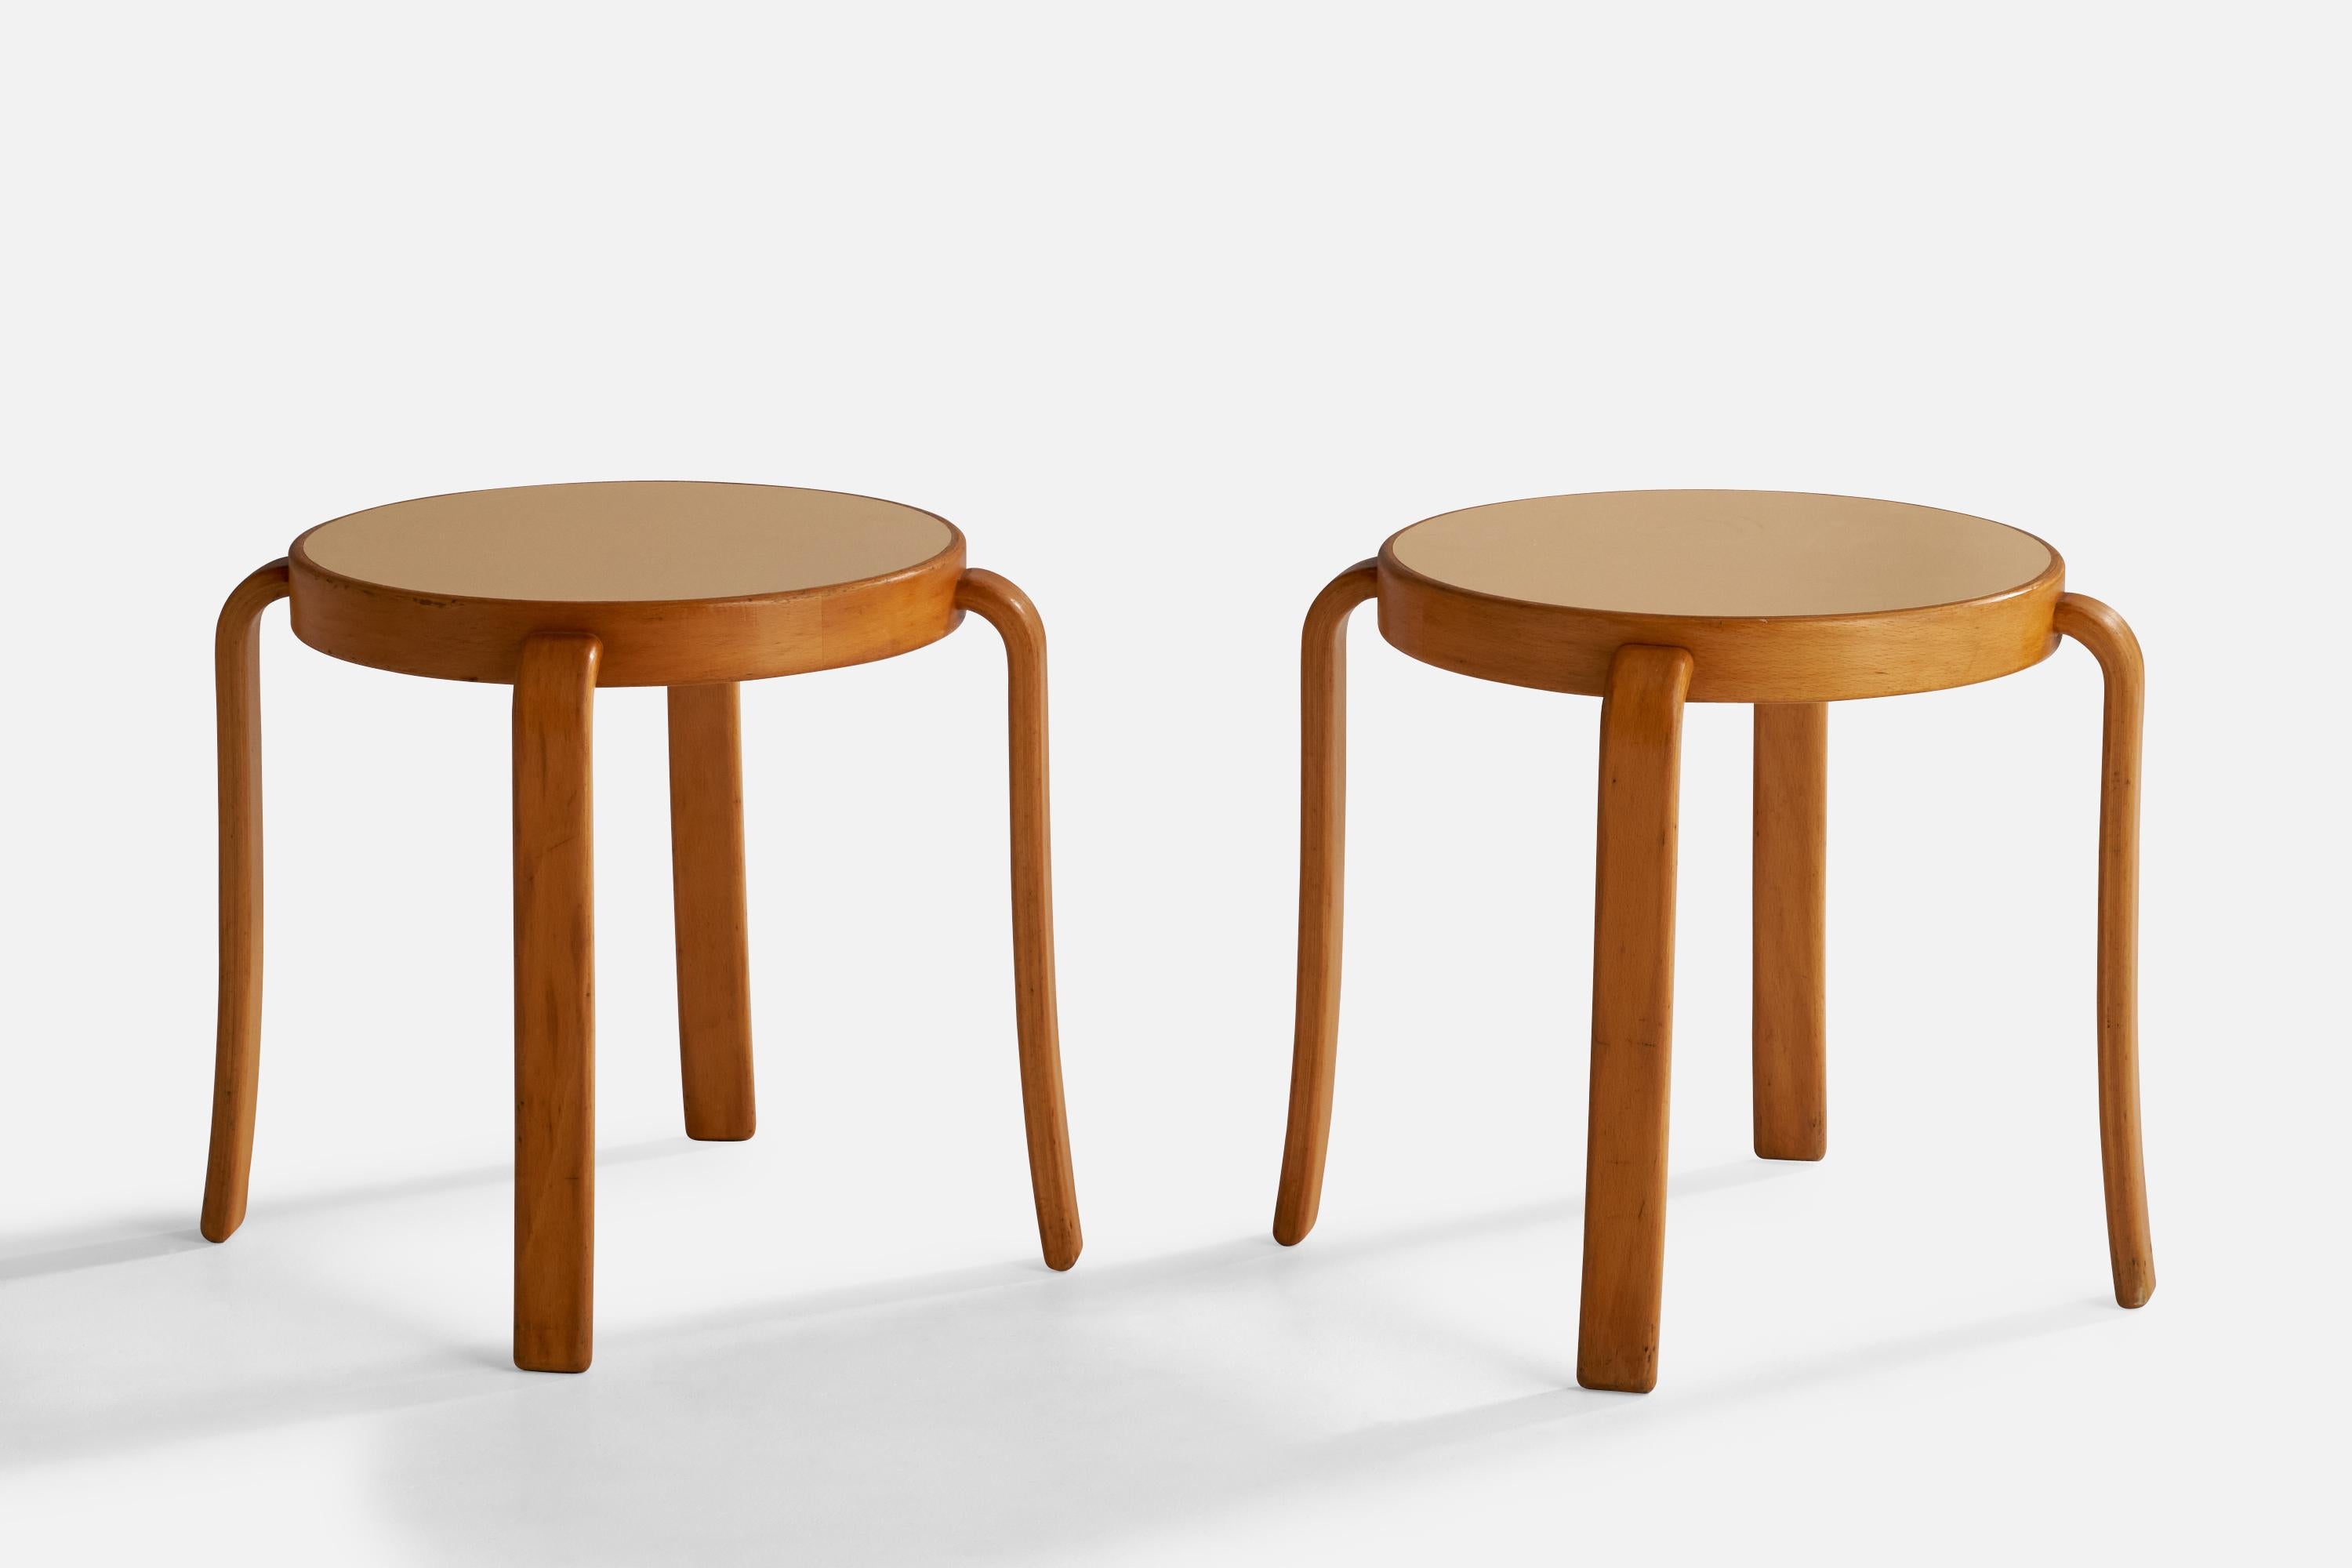 A pair of oak and beige laminate stools designed by Rud Thygesen and Johnny Sørensen and produced by Magnus Olesen, Denmark, 1960s.